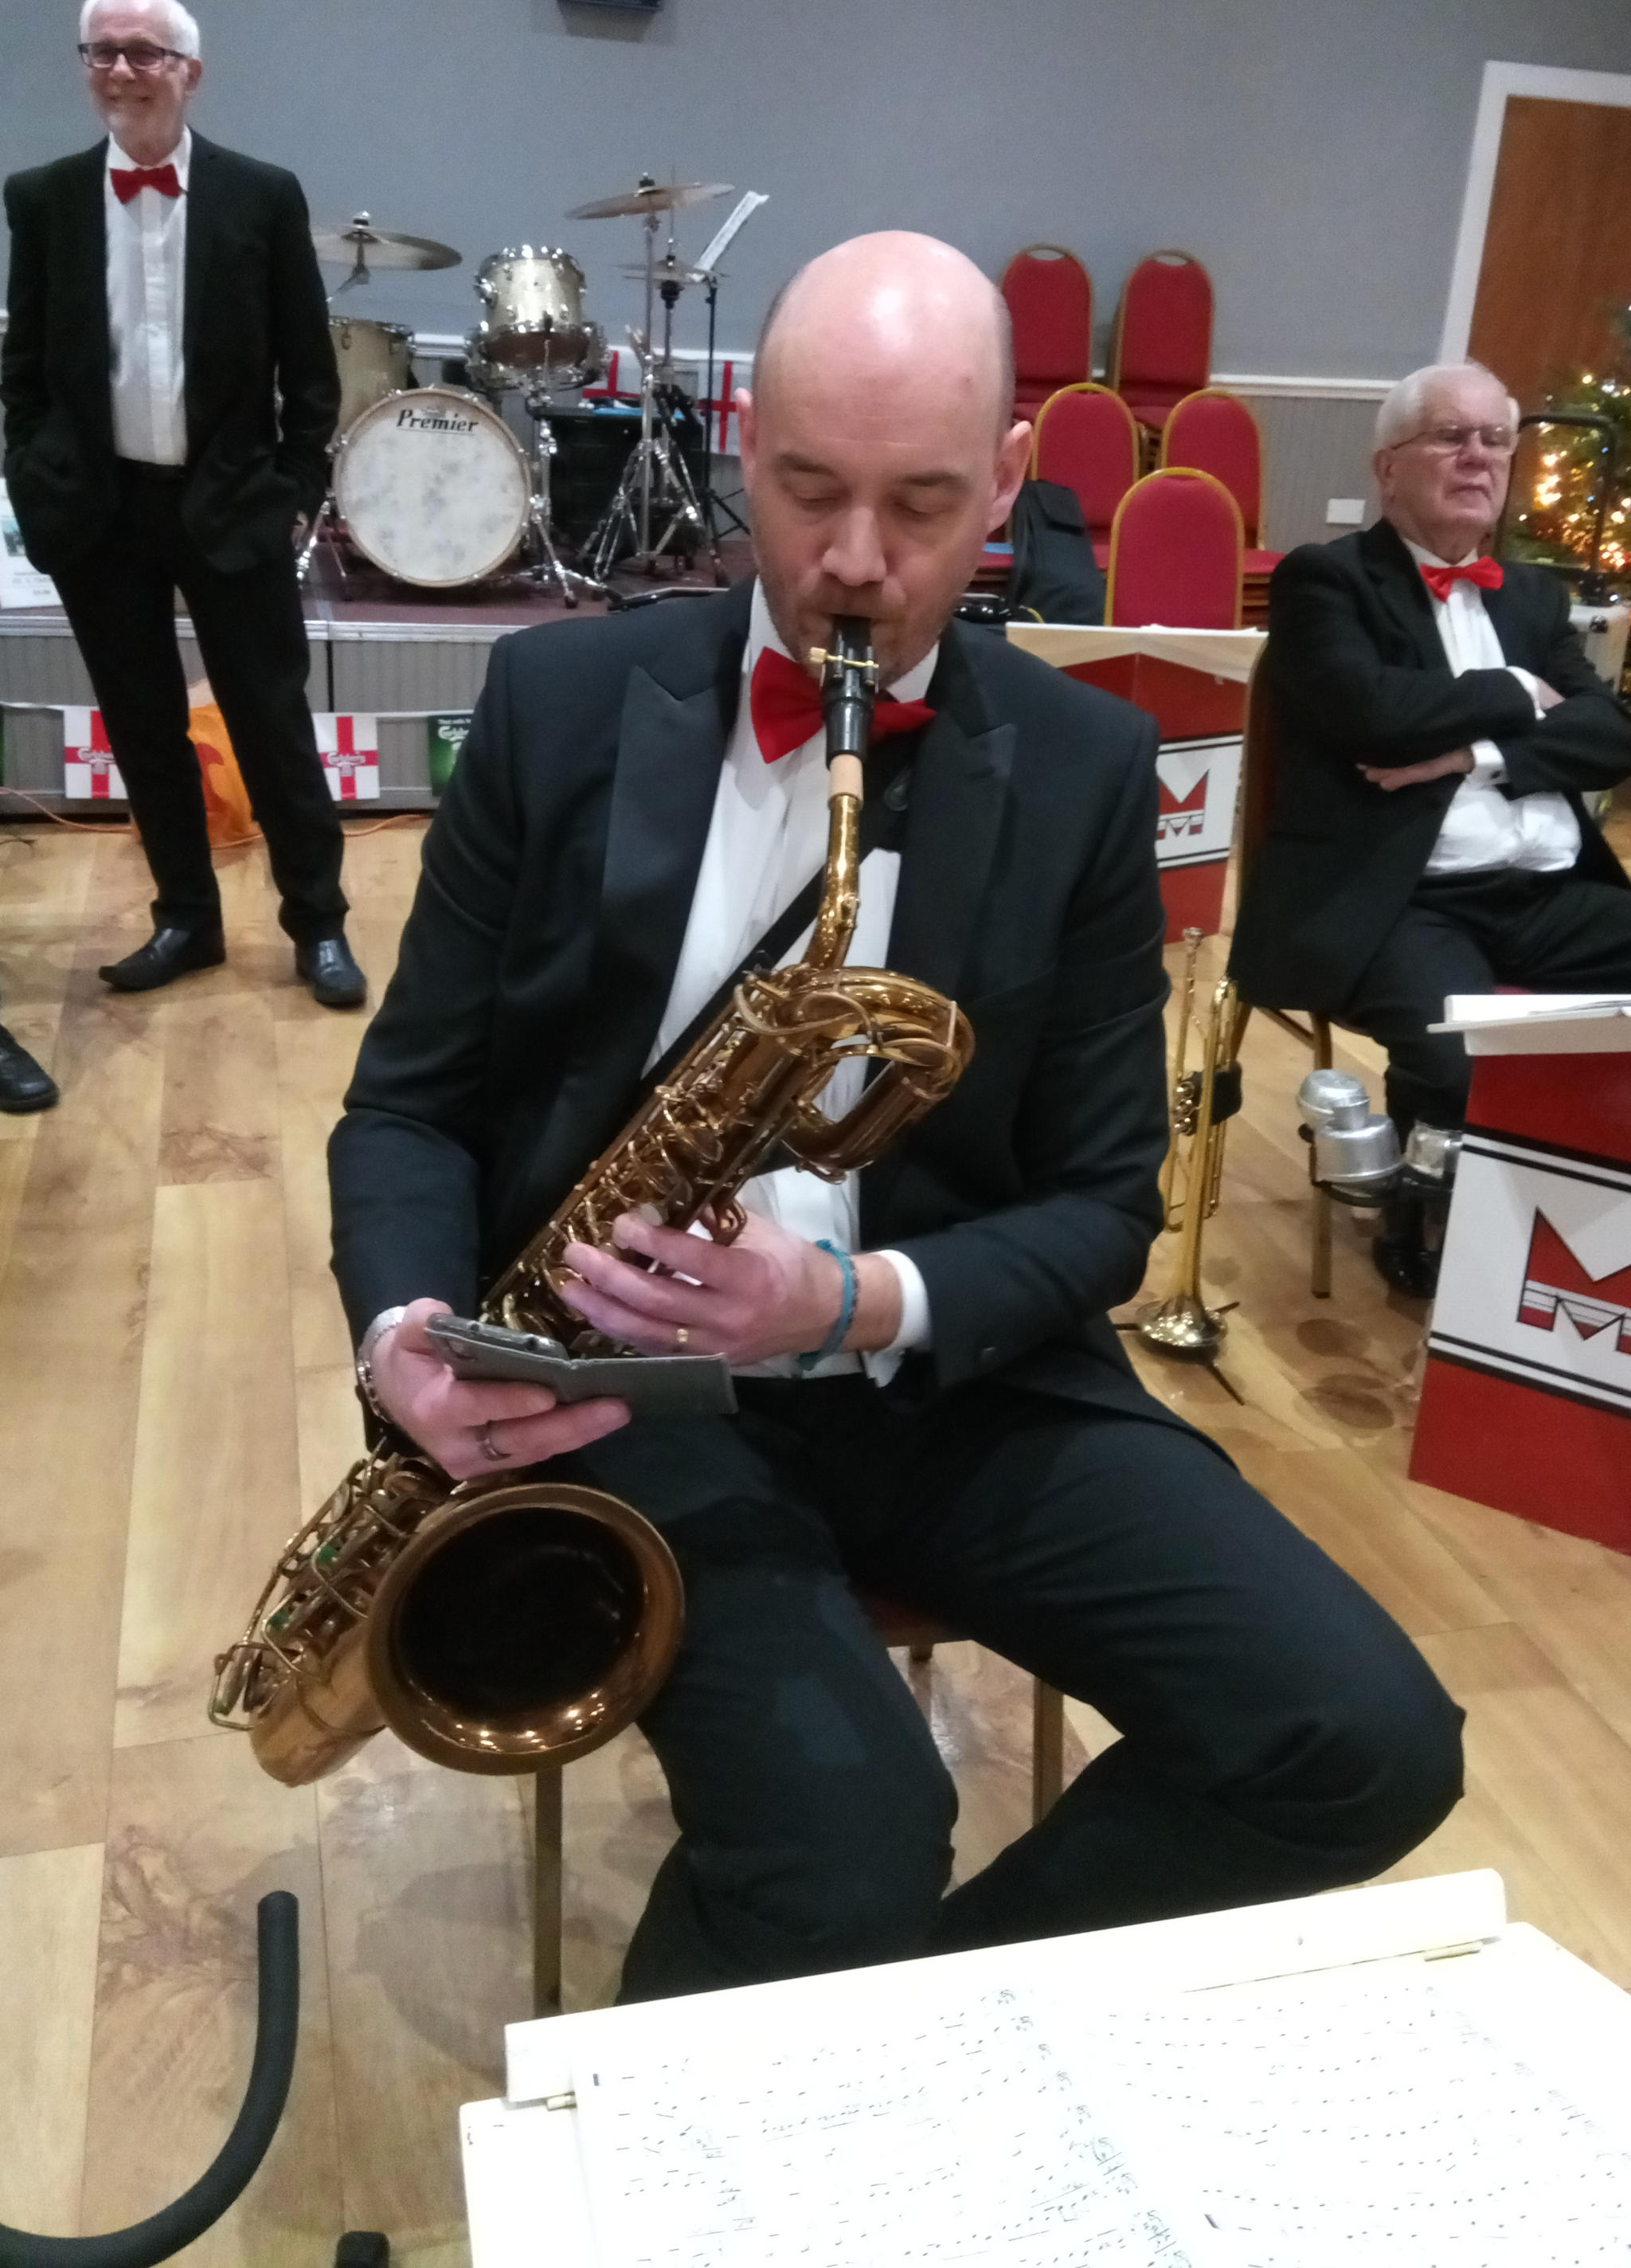 Stuart our baritone sax player, here playing the alto sax